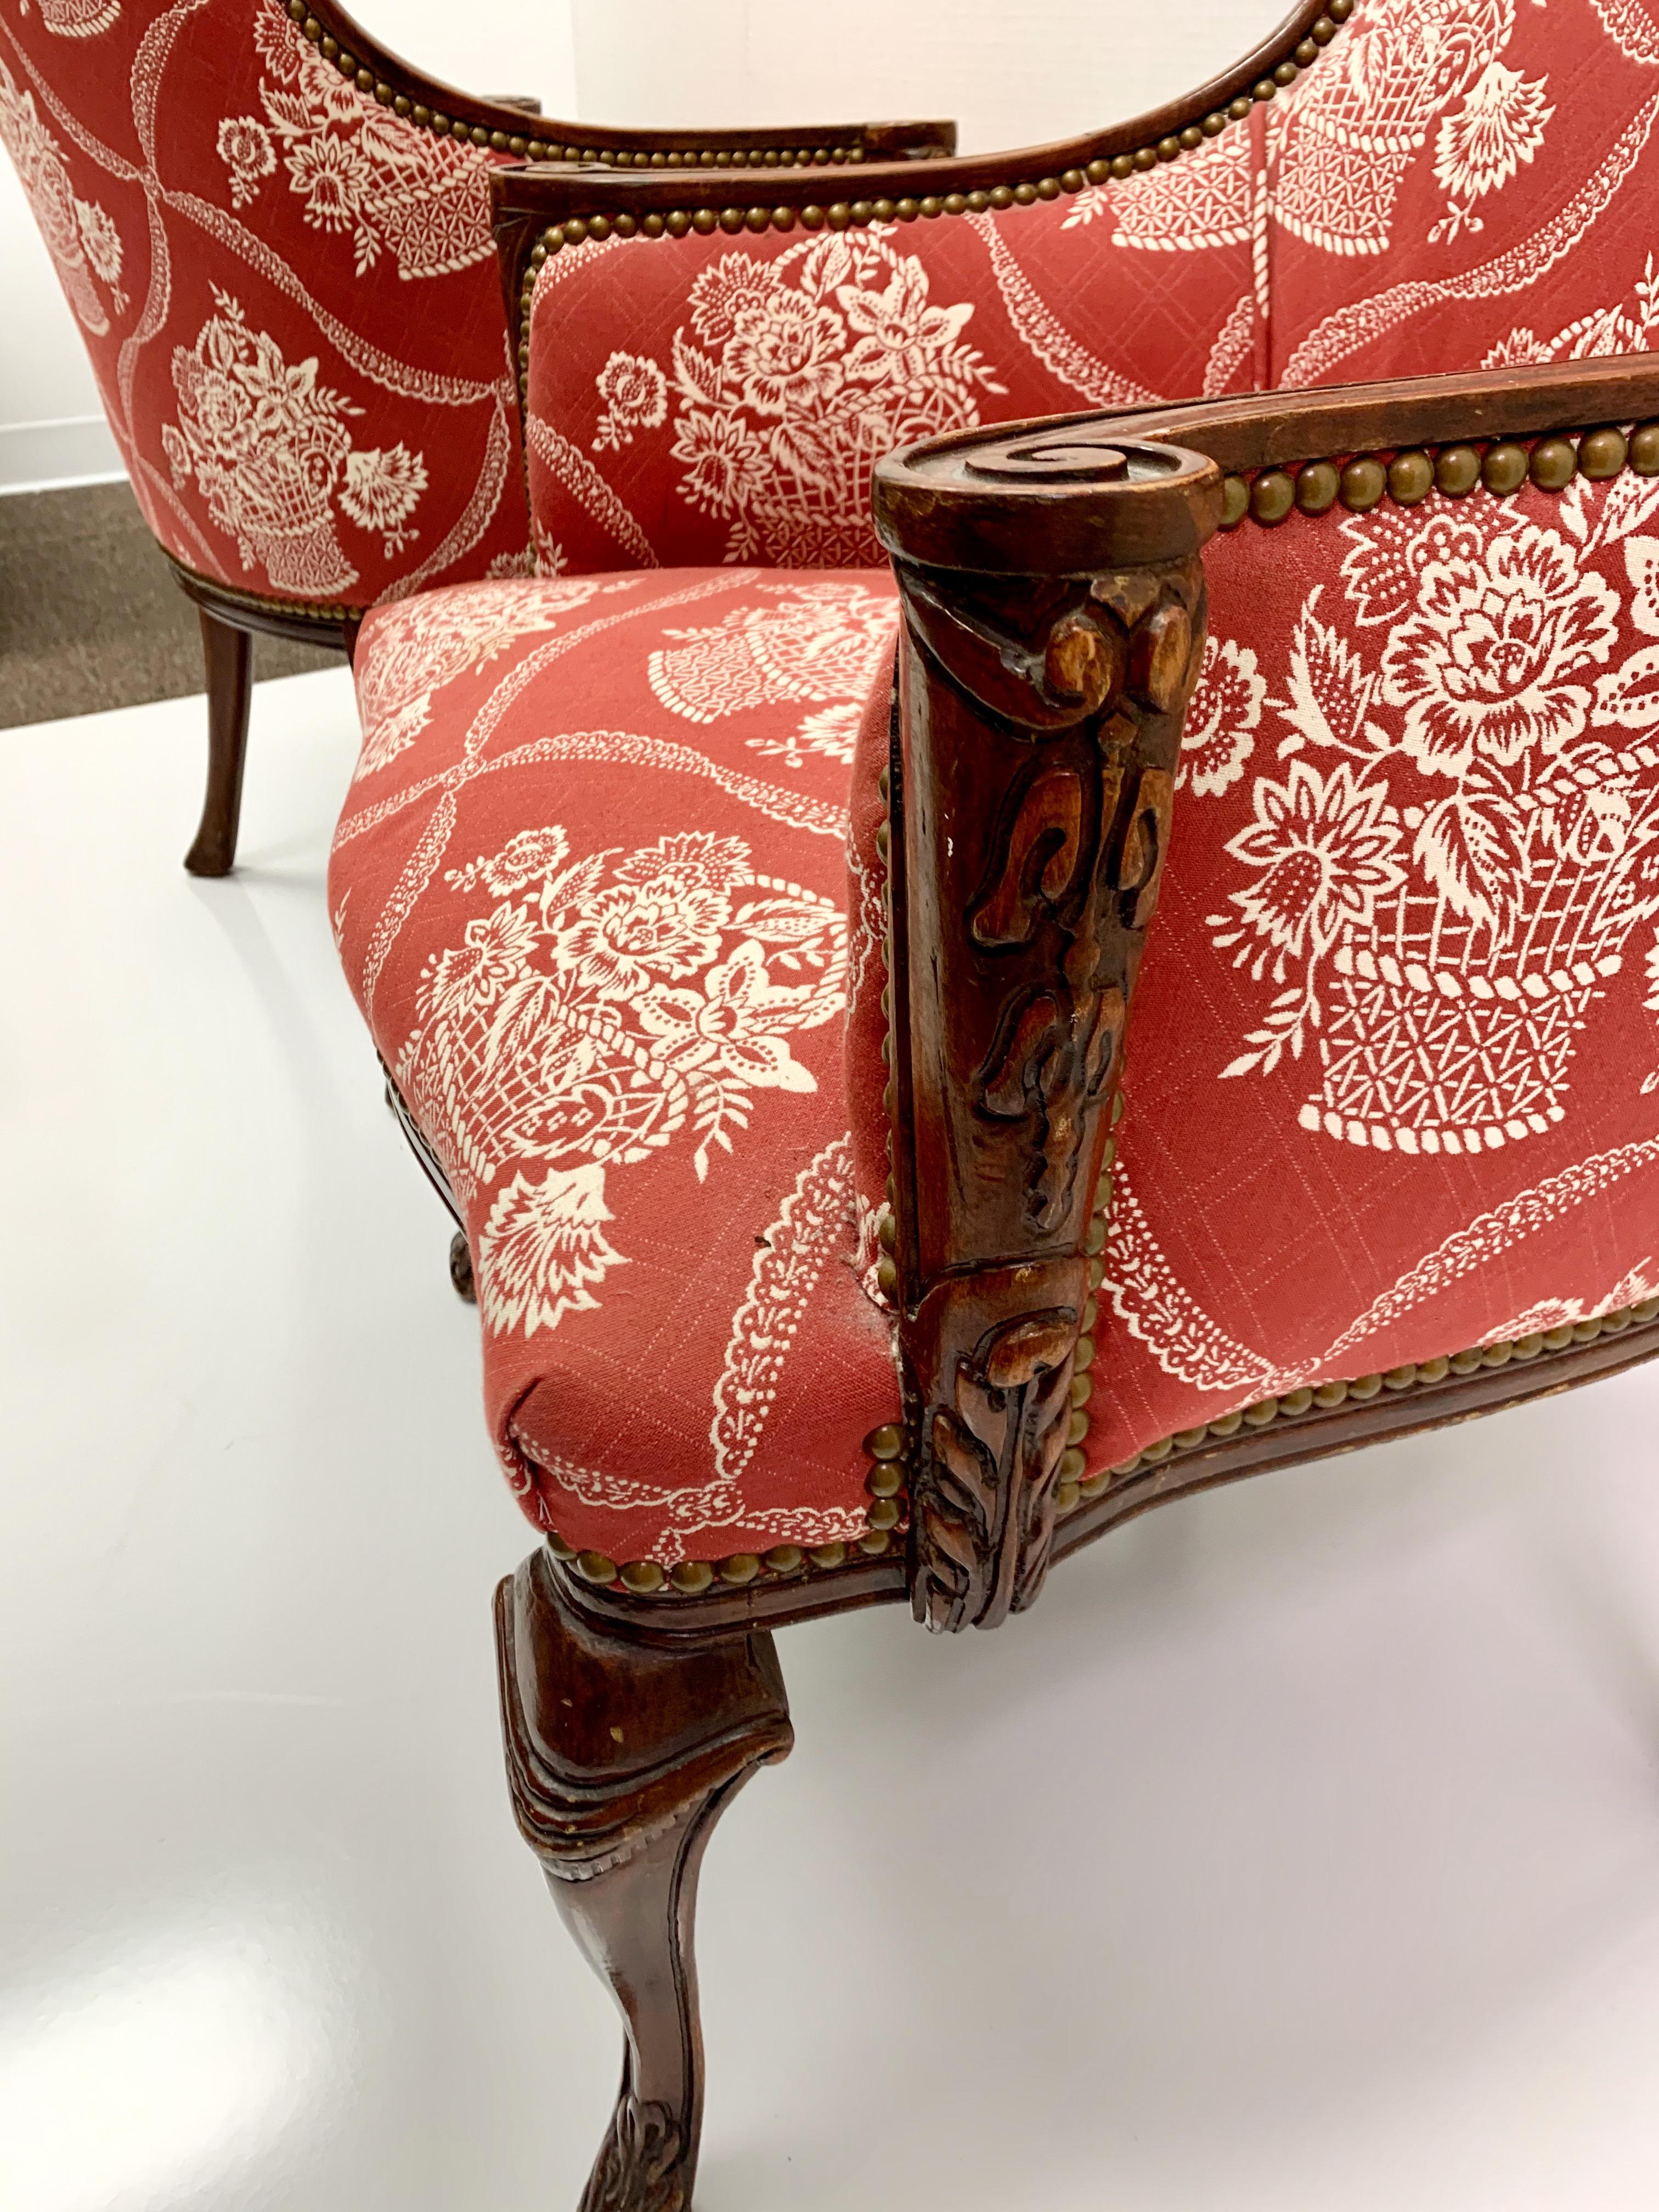 French Provincial Antique French Carved Mahogany Wing Chairs in Schumacher Fabric, Pair For Sale